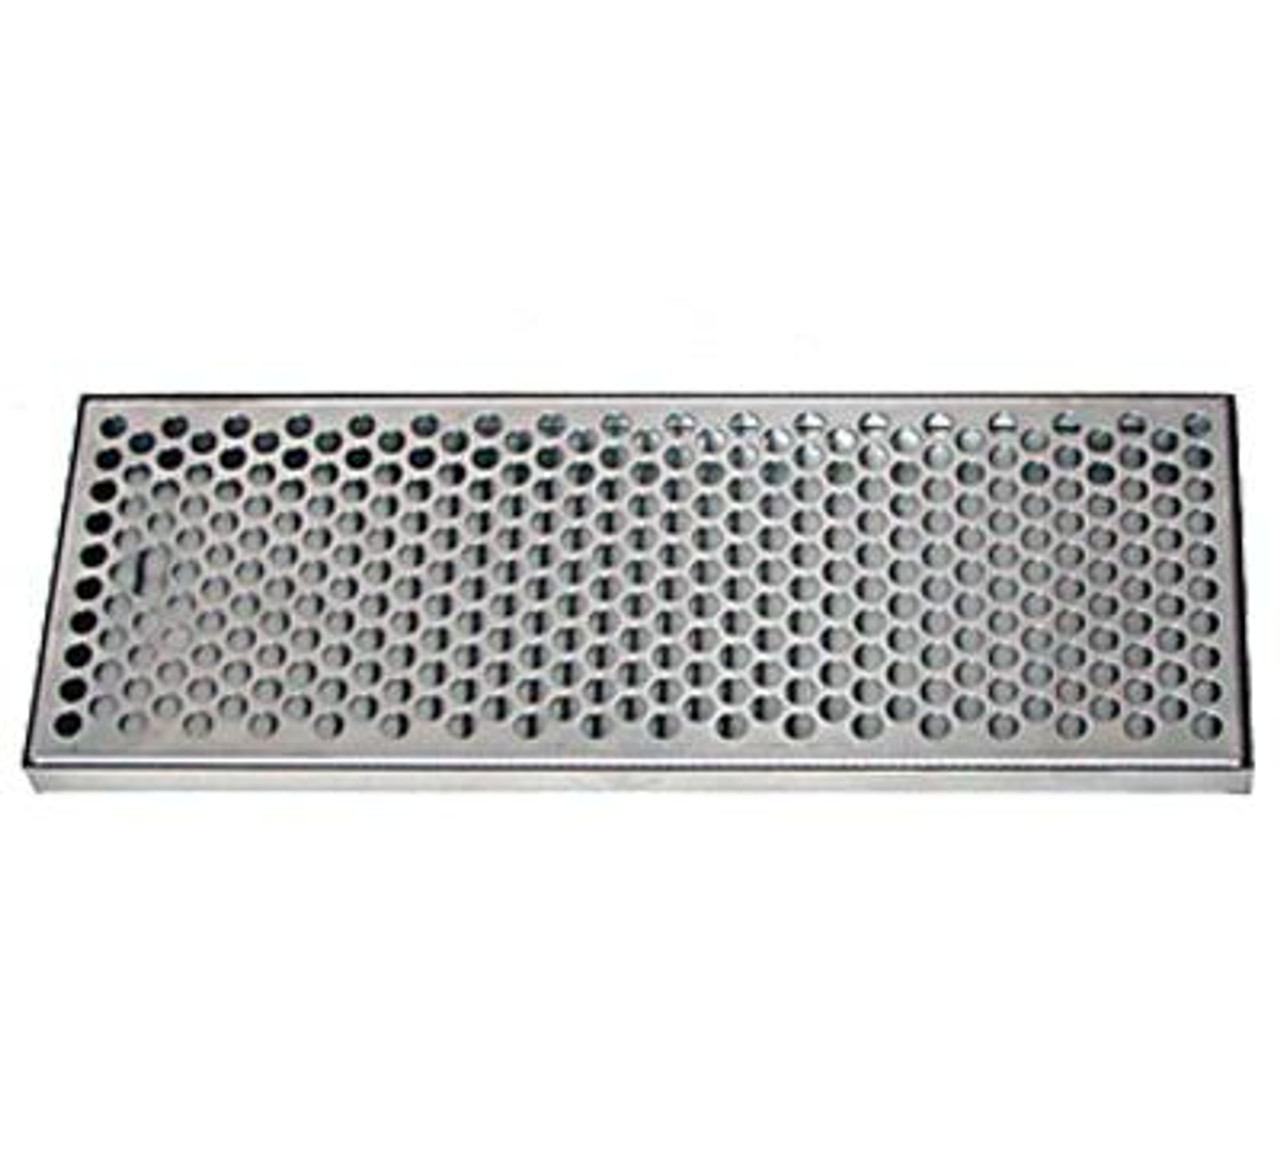 10 X 24 Surface Mount Drip Tray with Drain | S/S#8